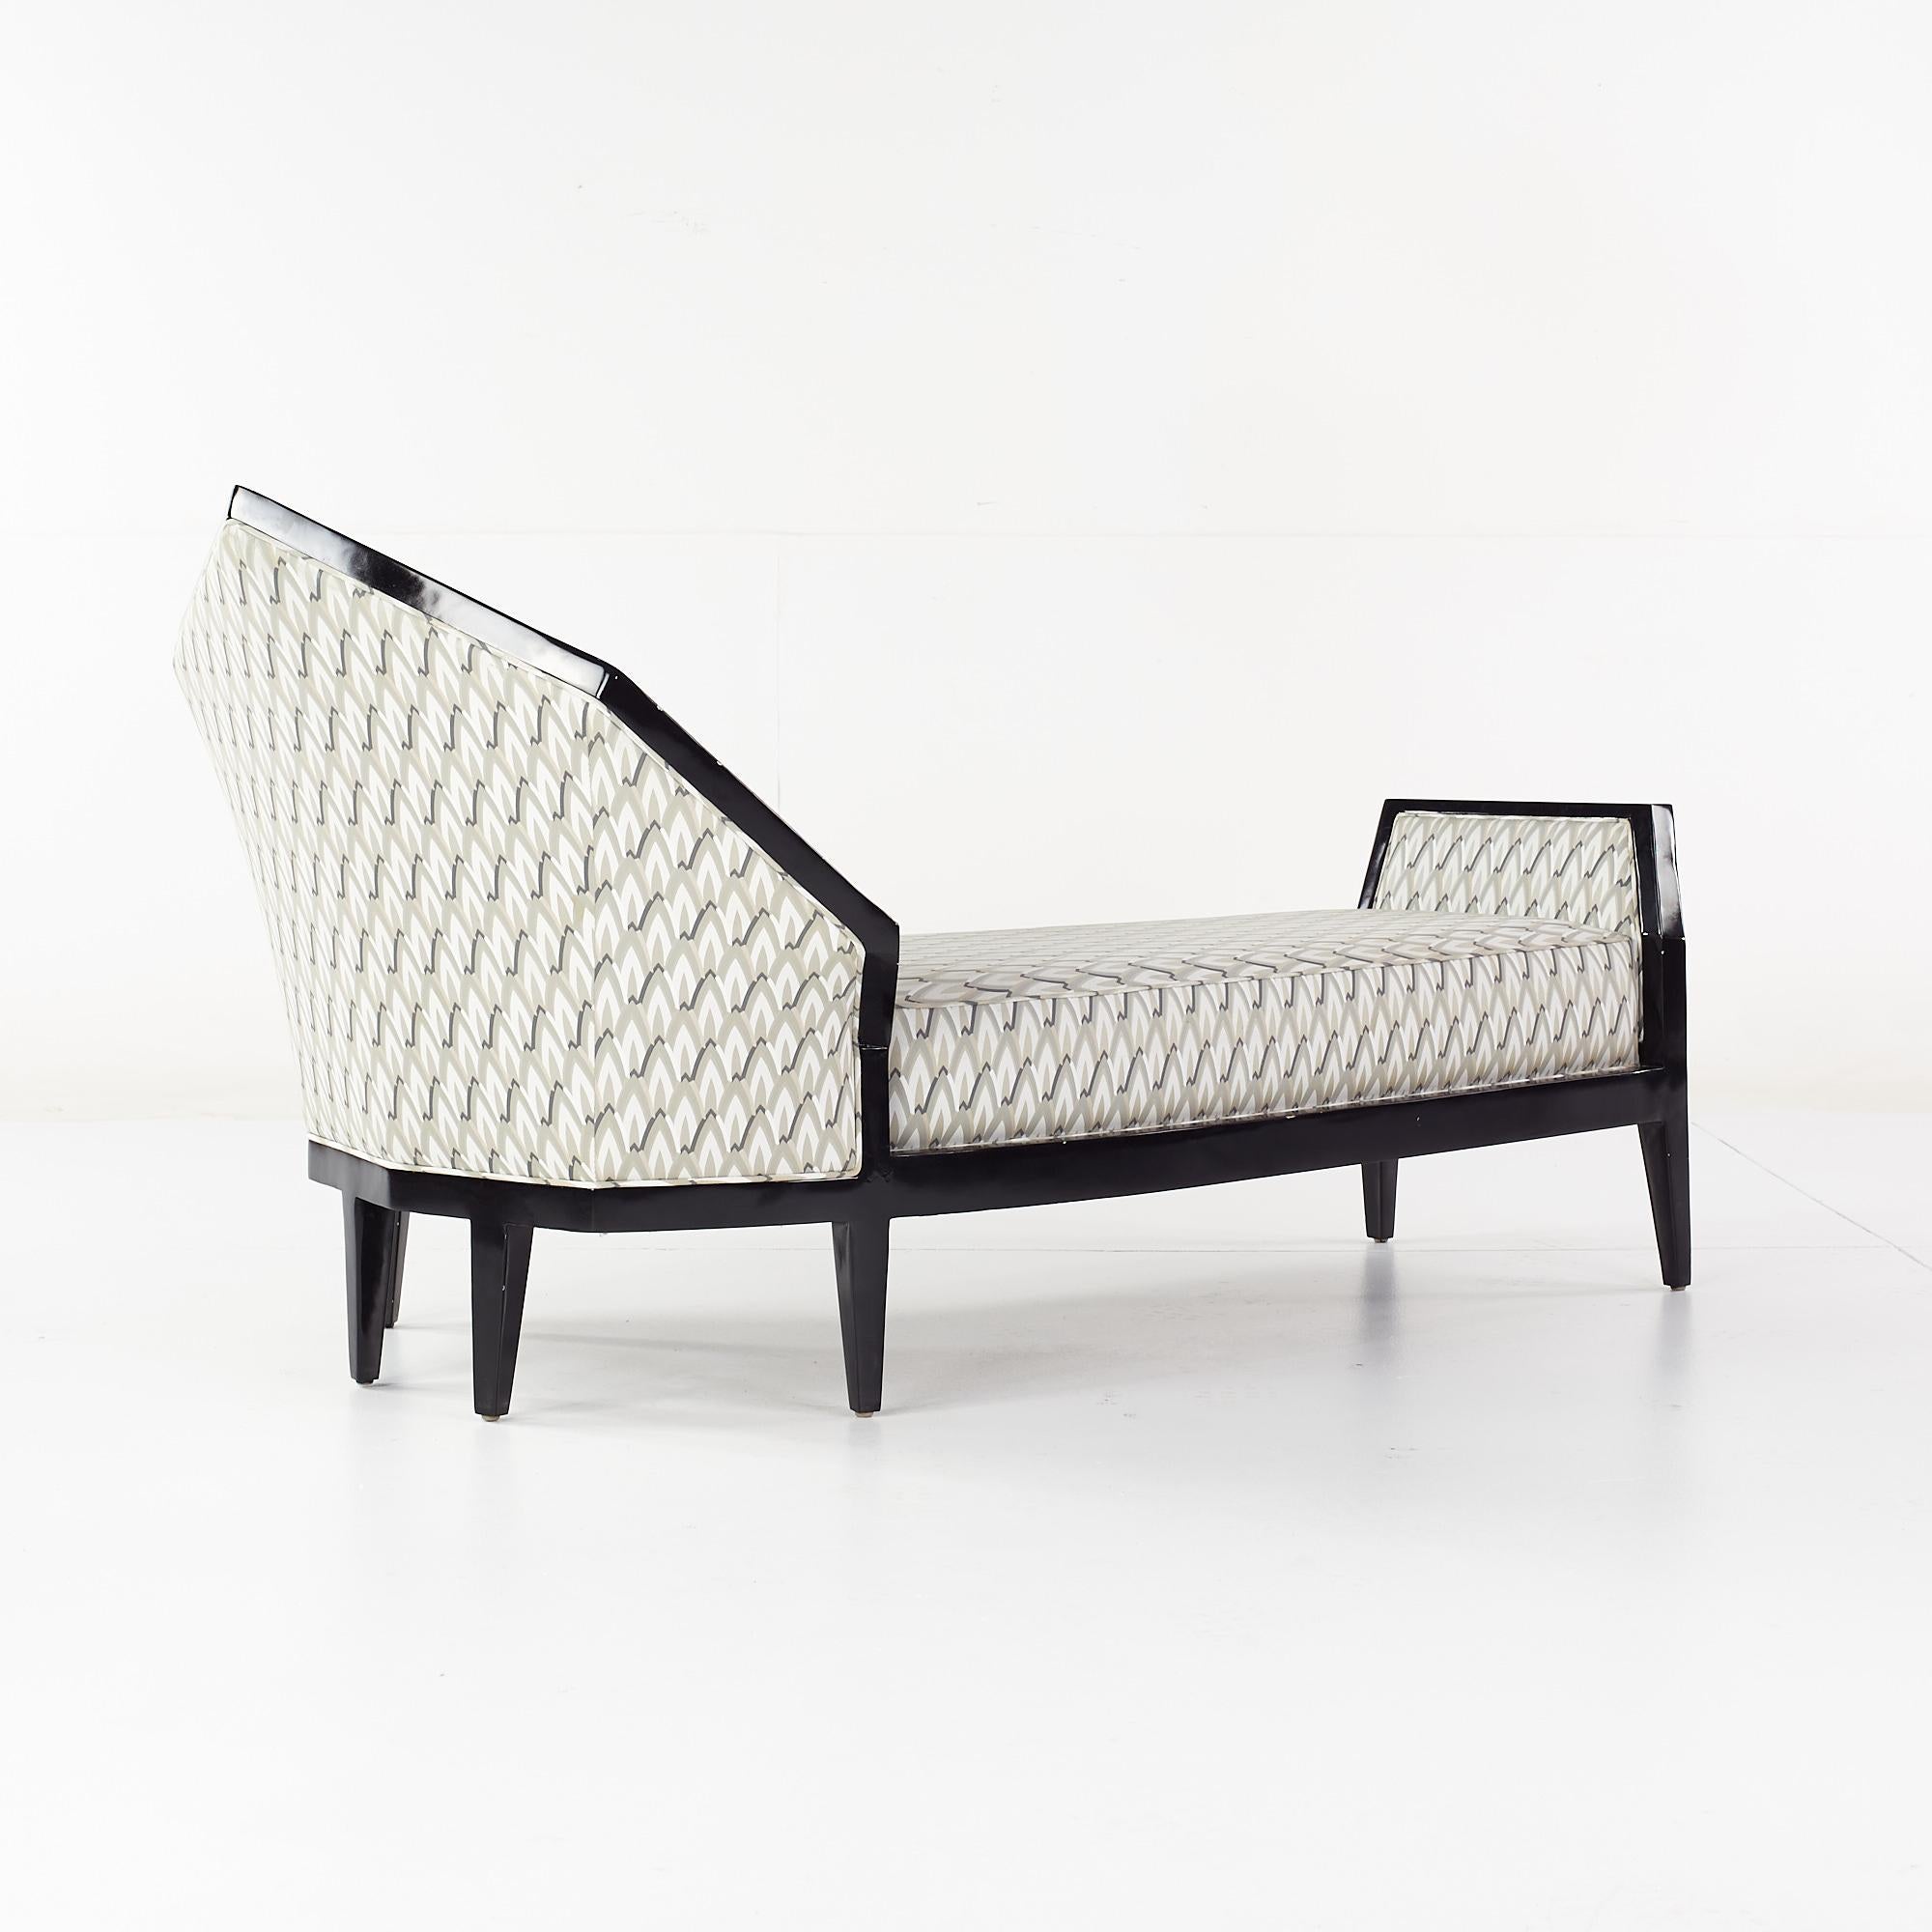 American Interior Crafts Geometric Chaise For Sale